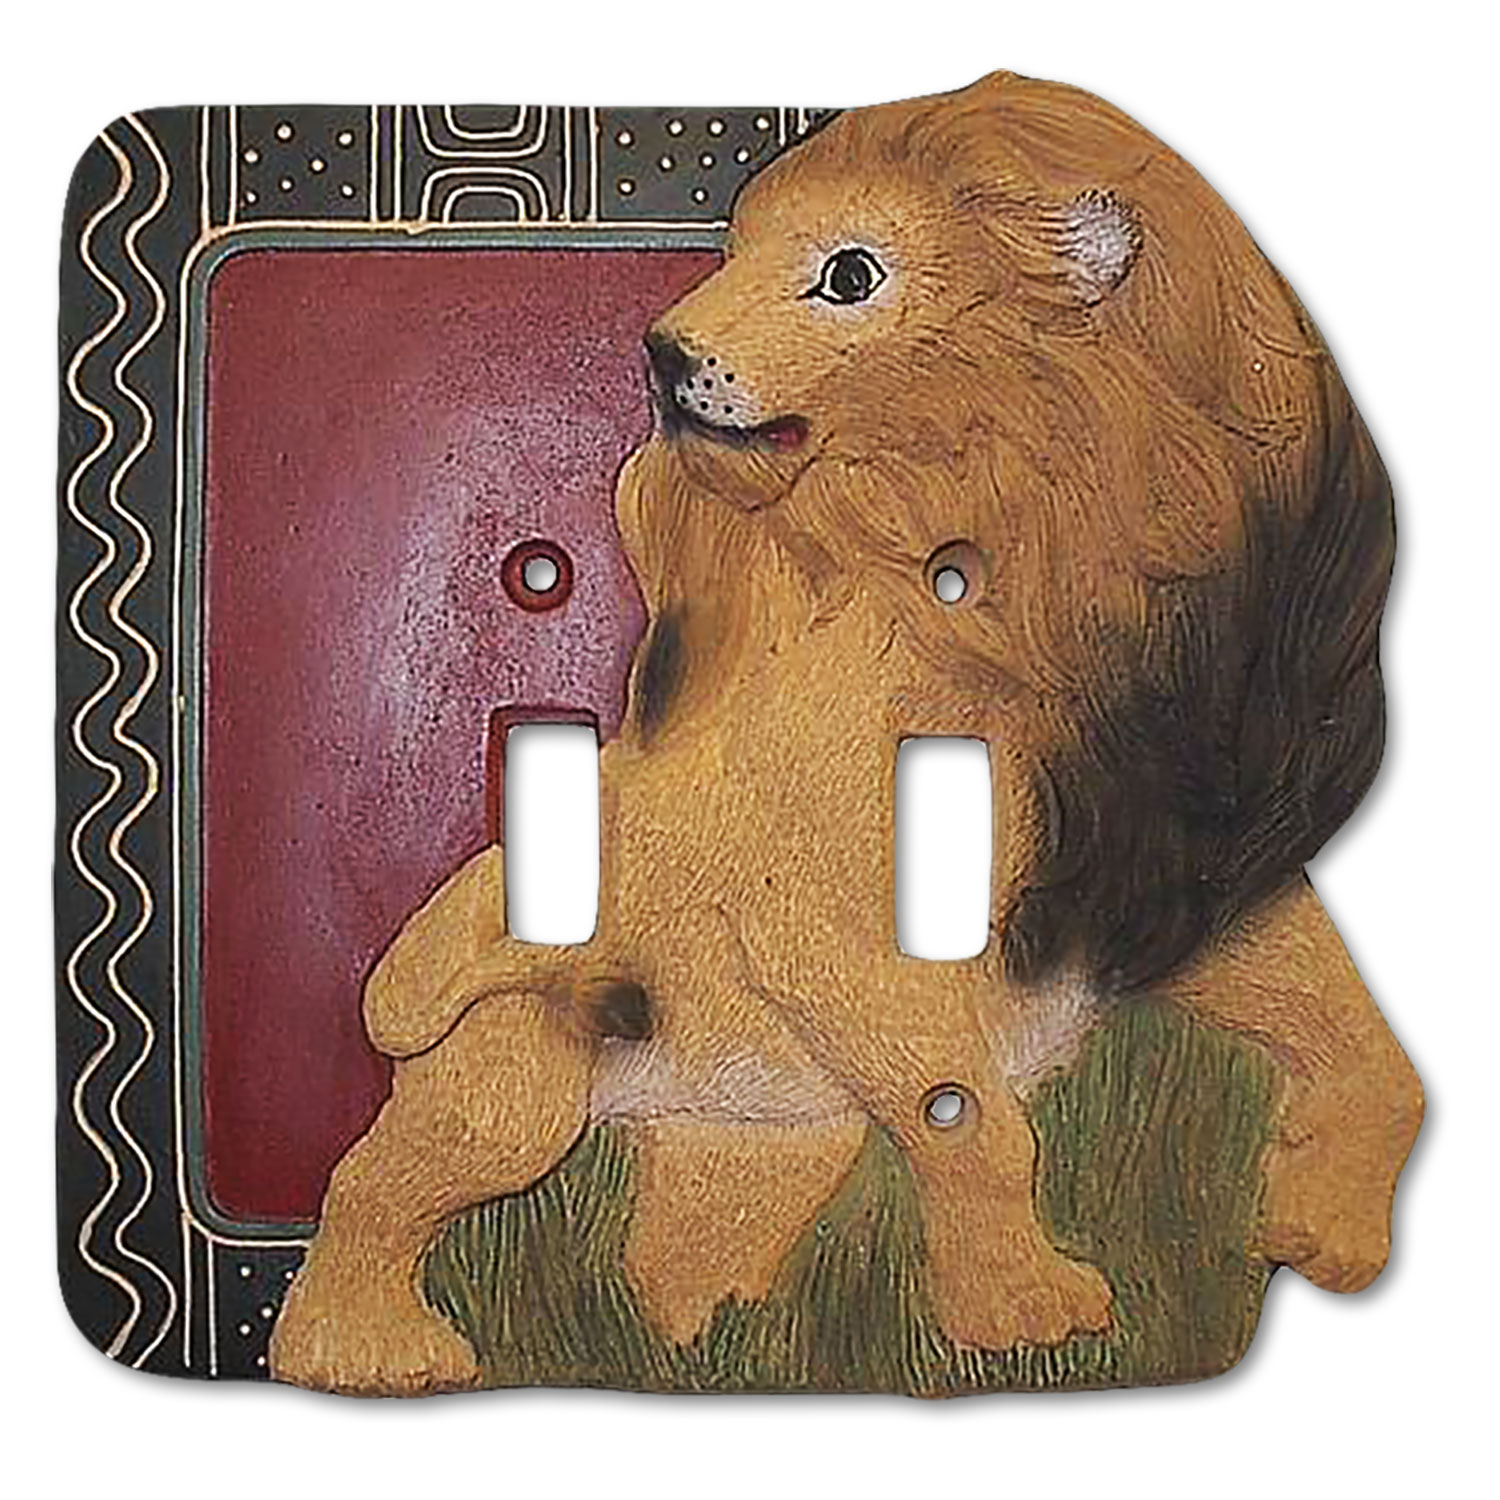 131122 - Vickilane Hand Painted Wall Plate - Lion - Standard Switch - Double